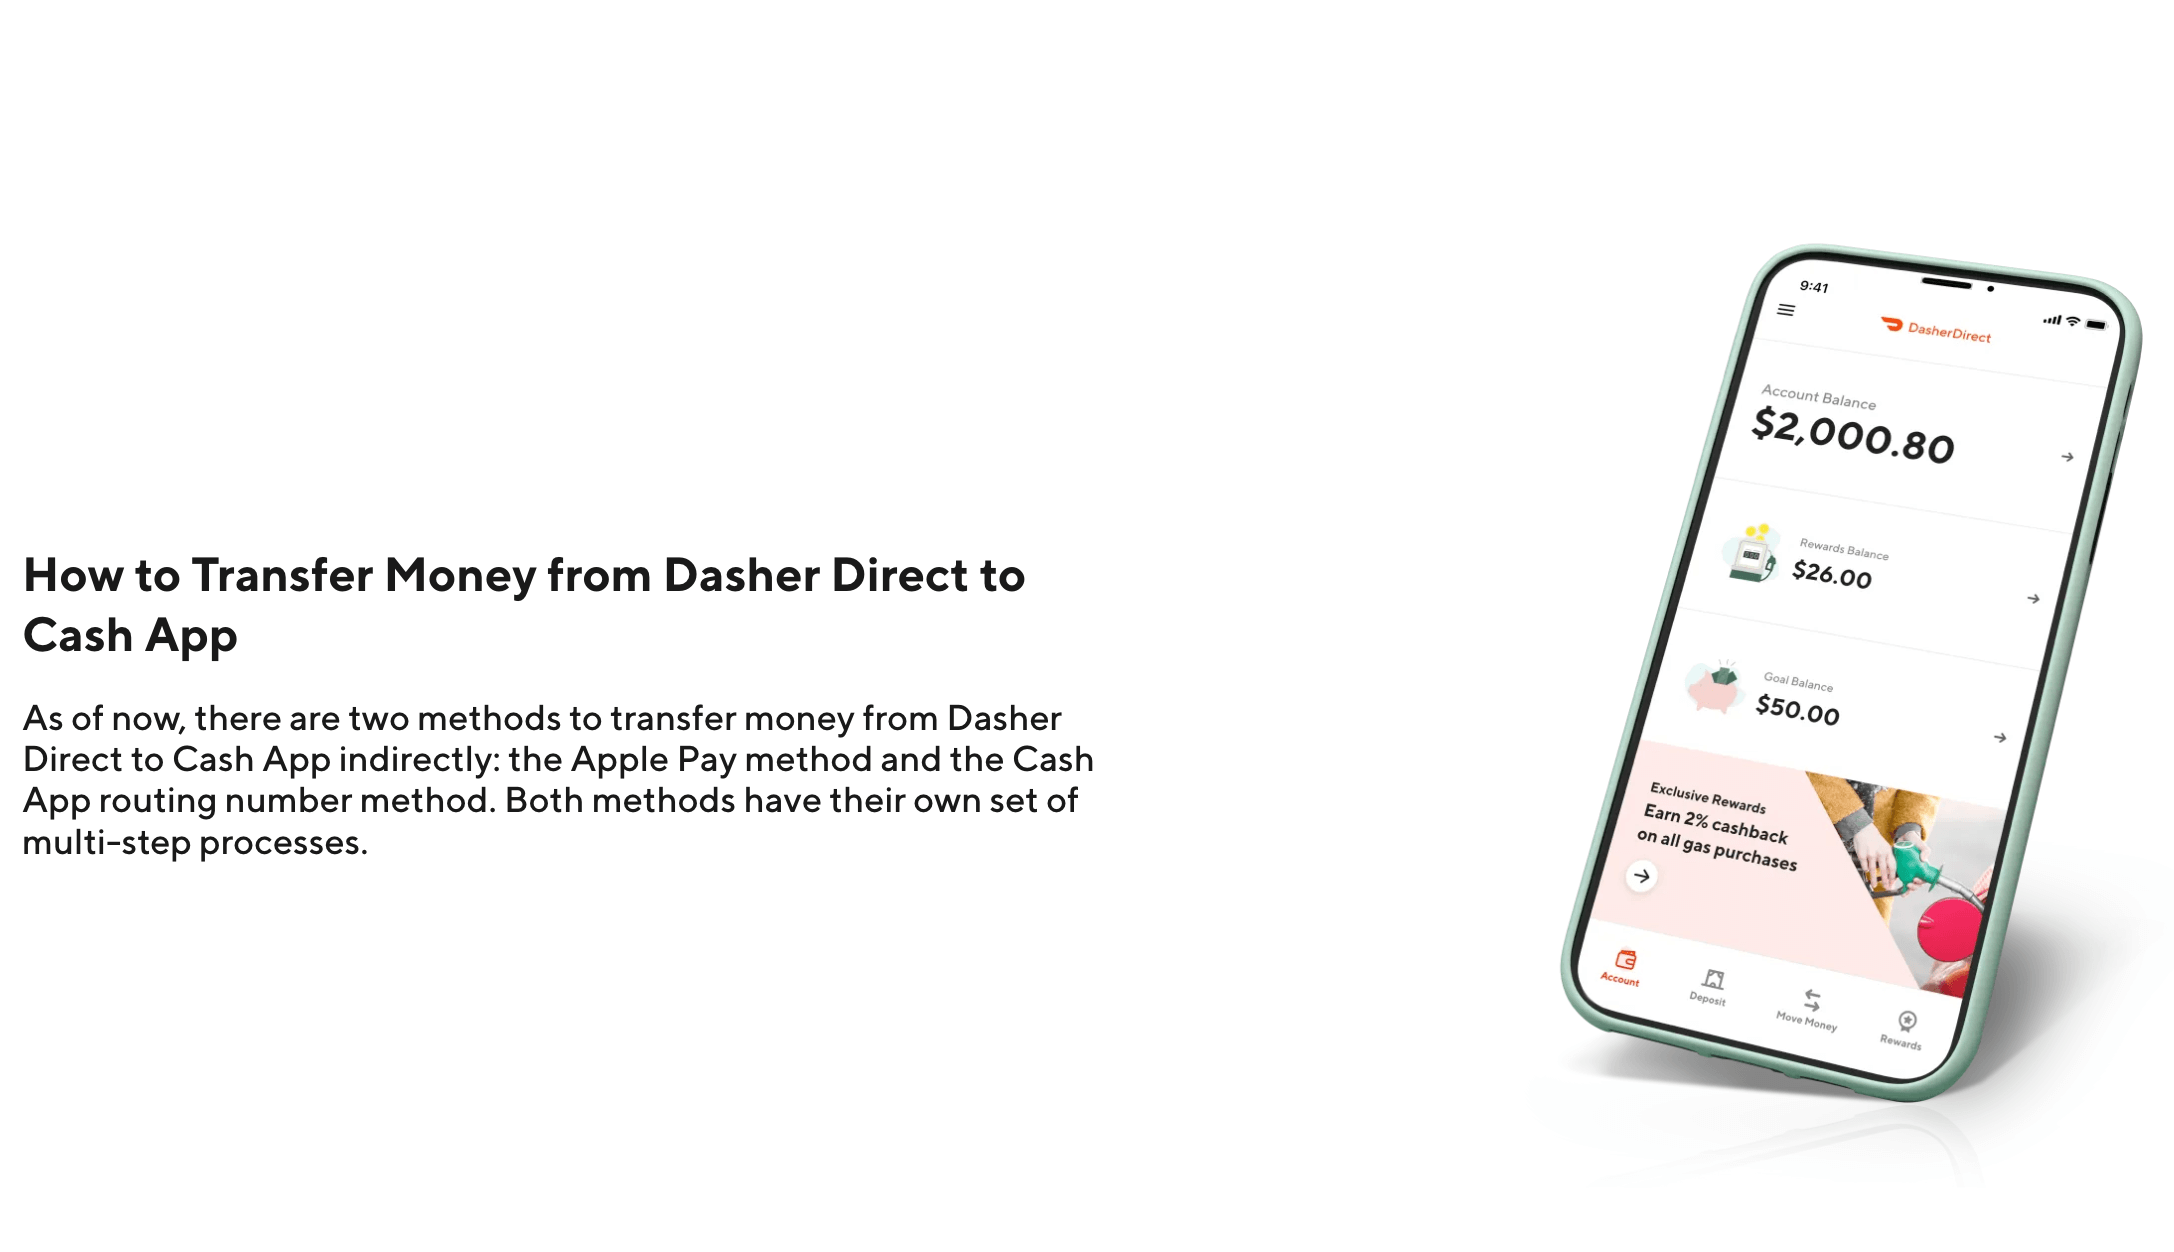 can you transfer money from dasher direct to cash app